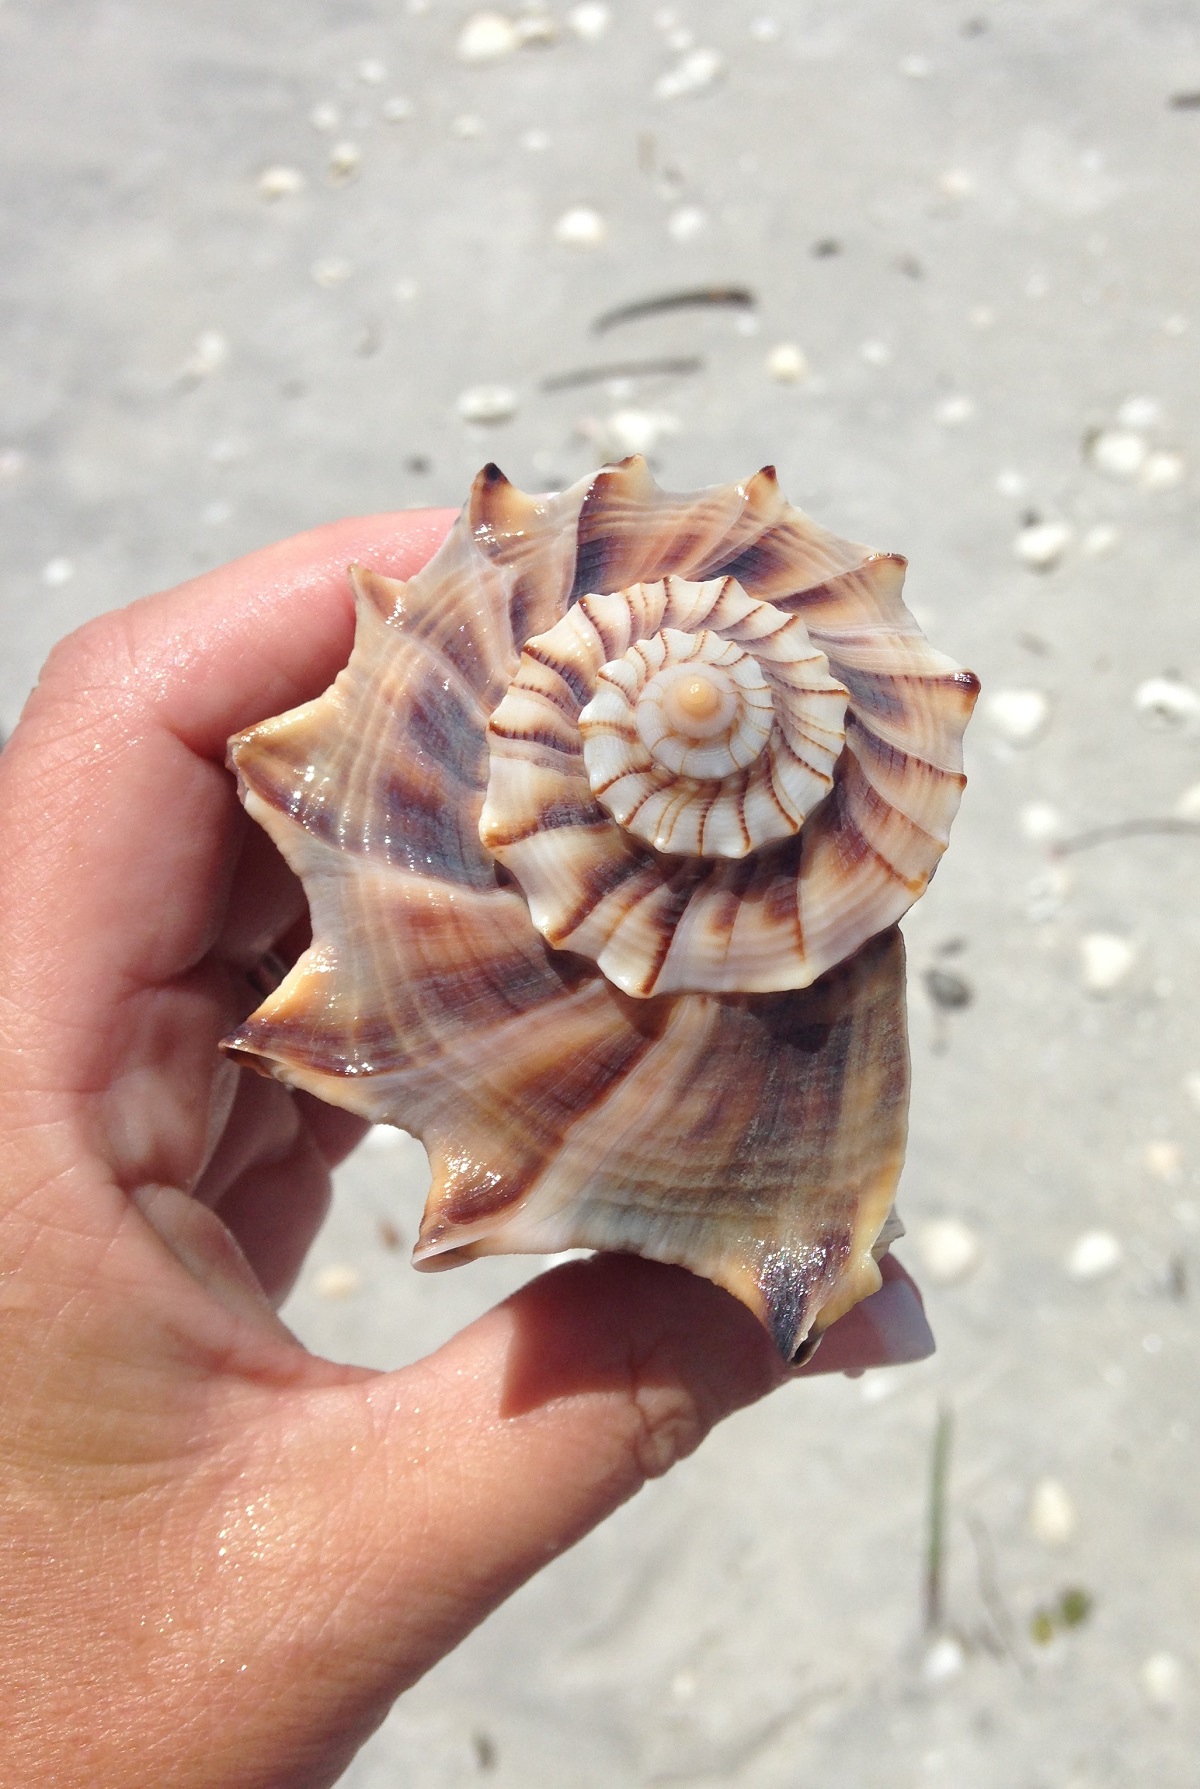 Top view of large seashell